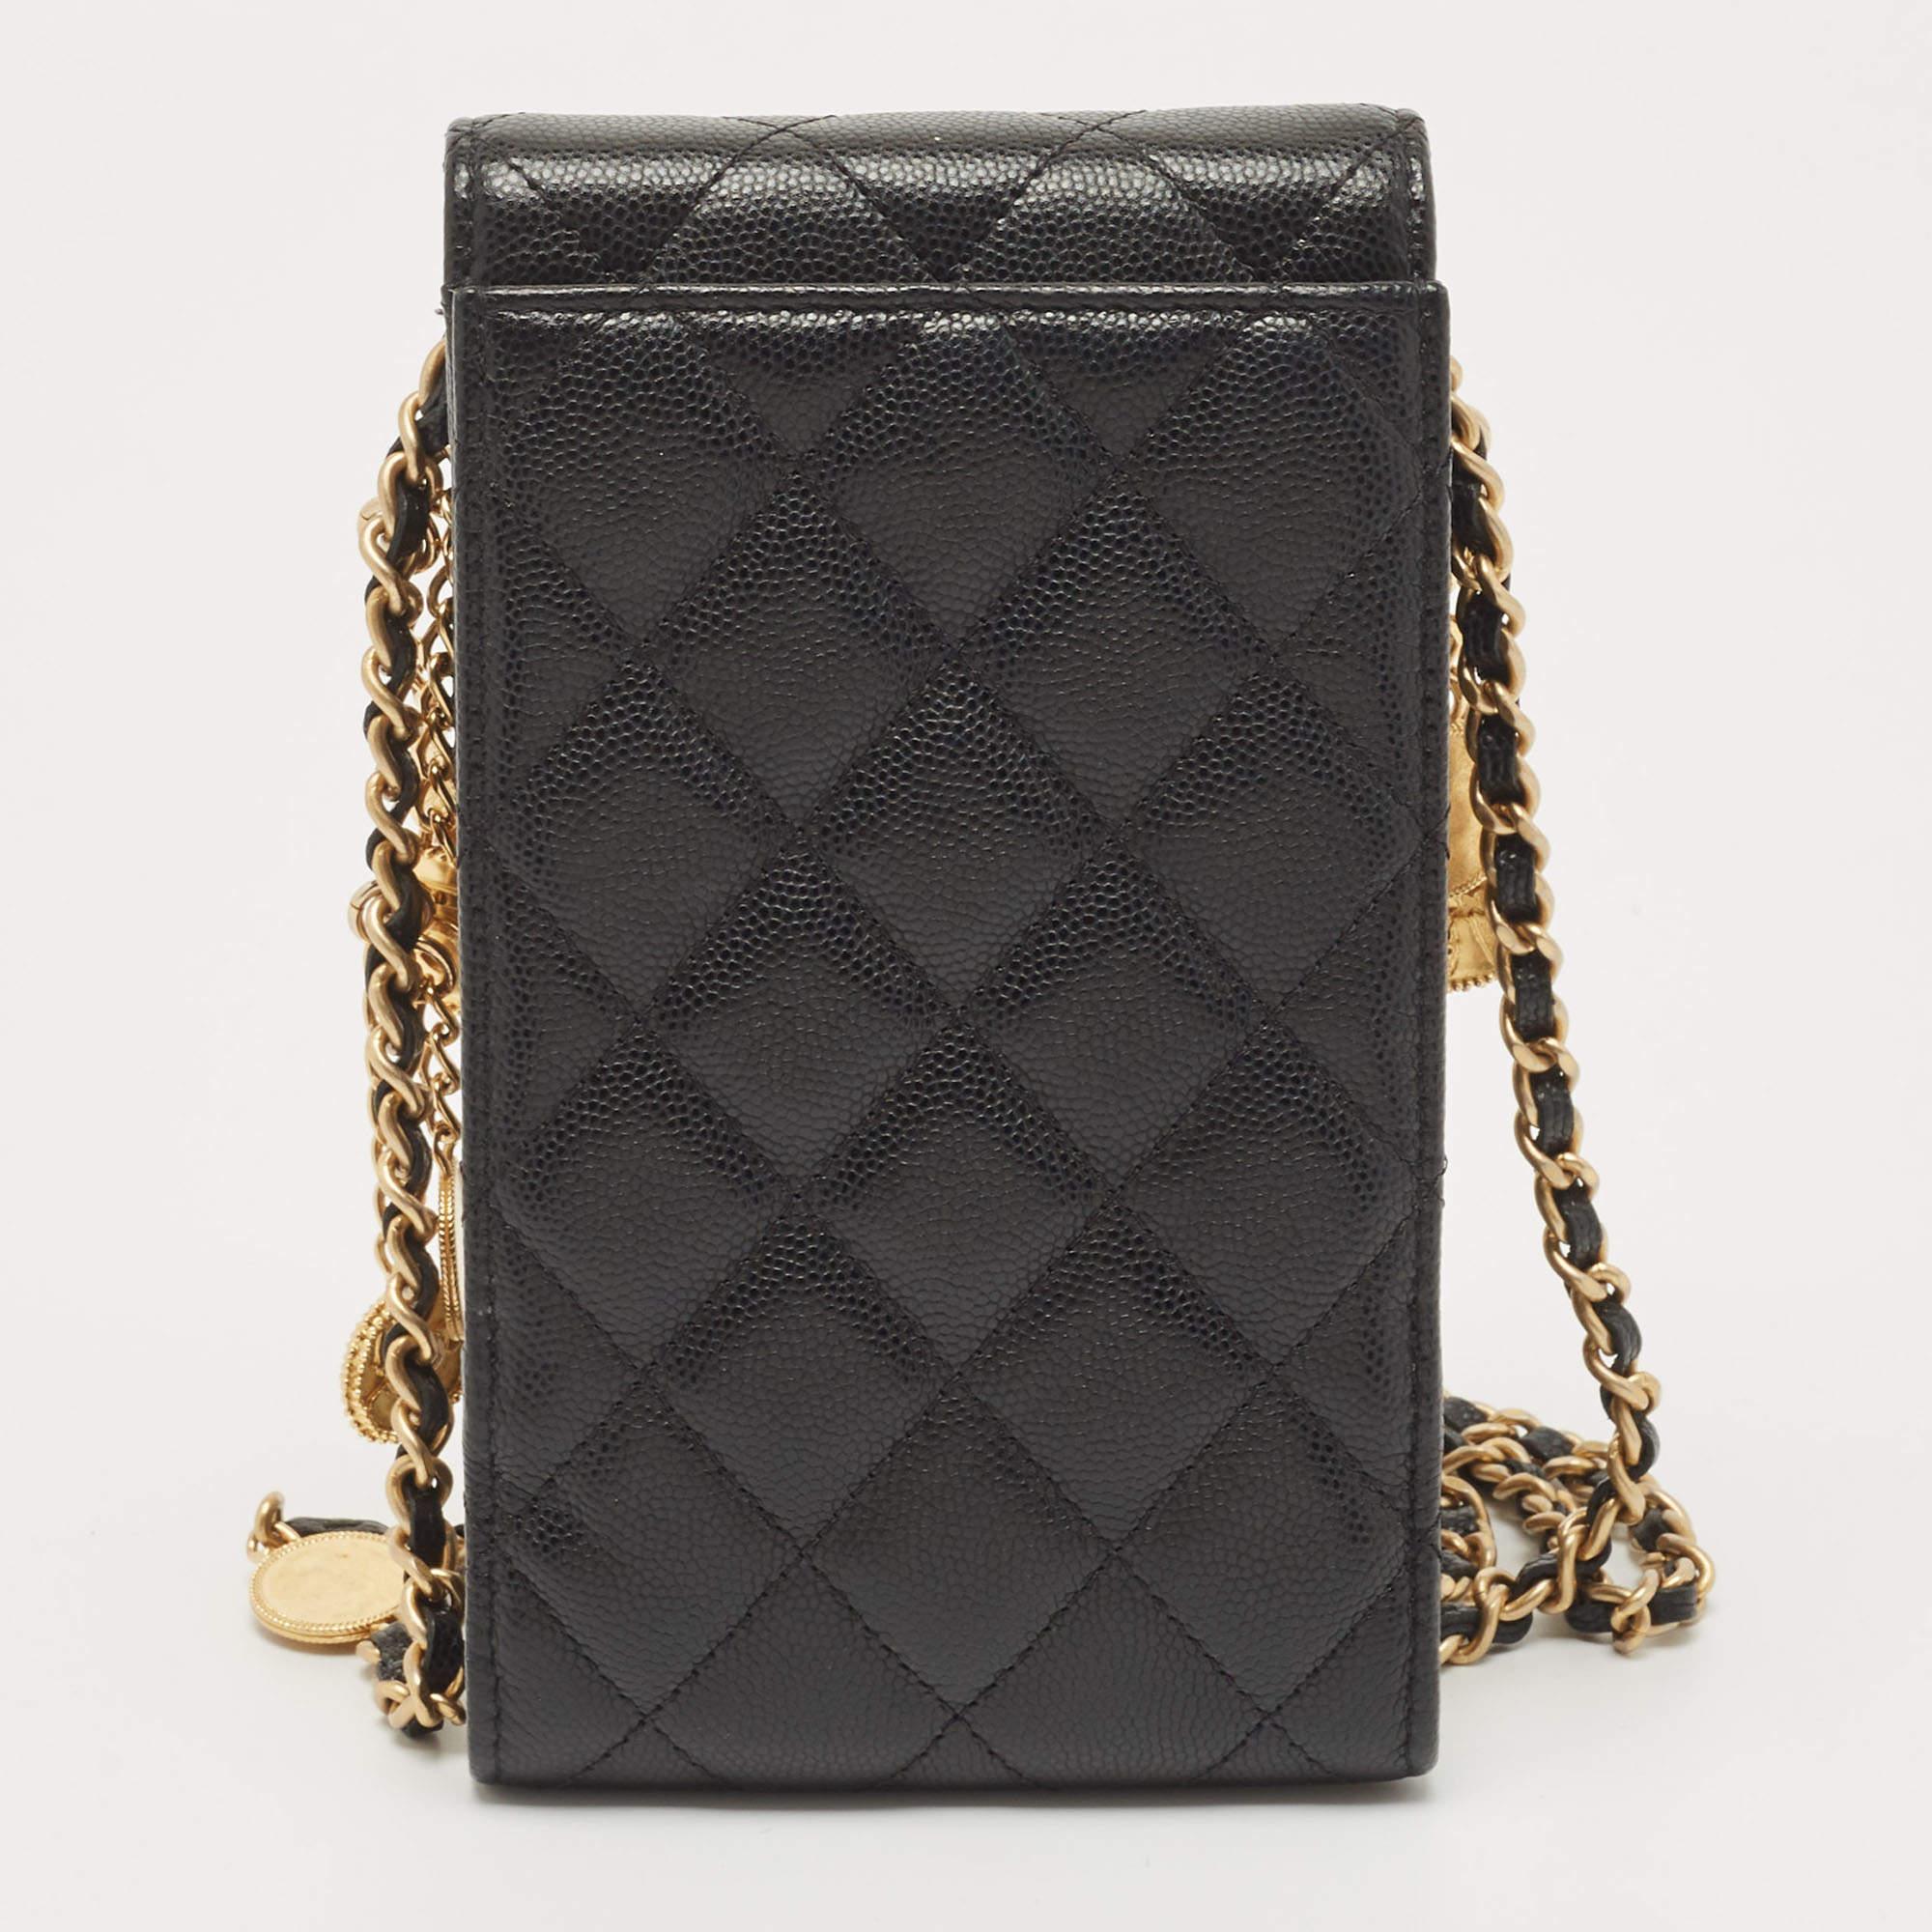 This Chanel phone crossbody bag for women is an example of the brand's fine designs that are skillfully crafted to project a classic charm. It is a functional creation with an elevating appeal.

Includes: Original Dustbag, Original Pouch